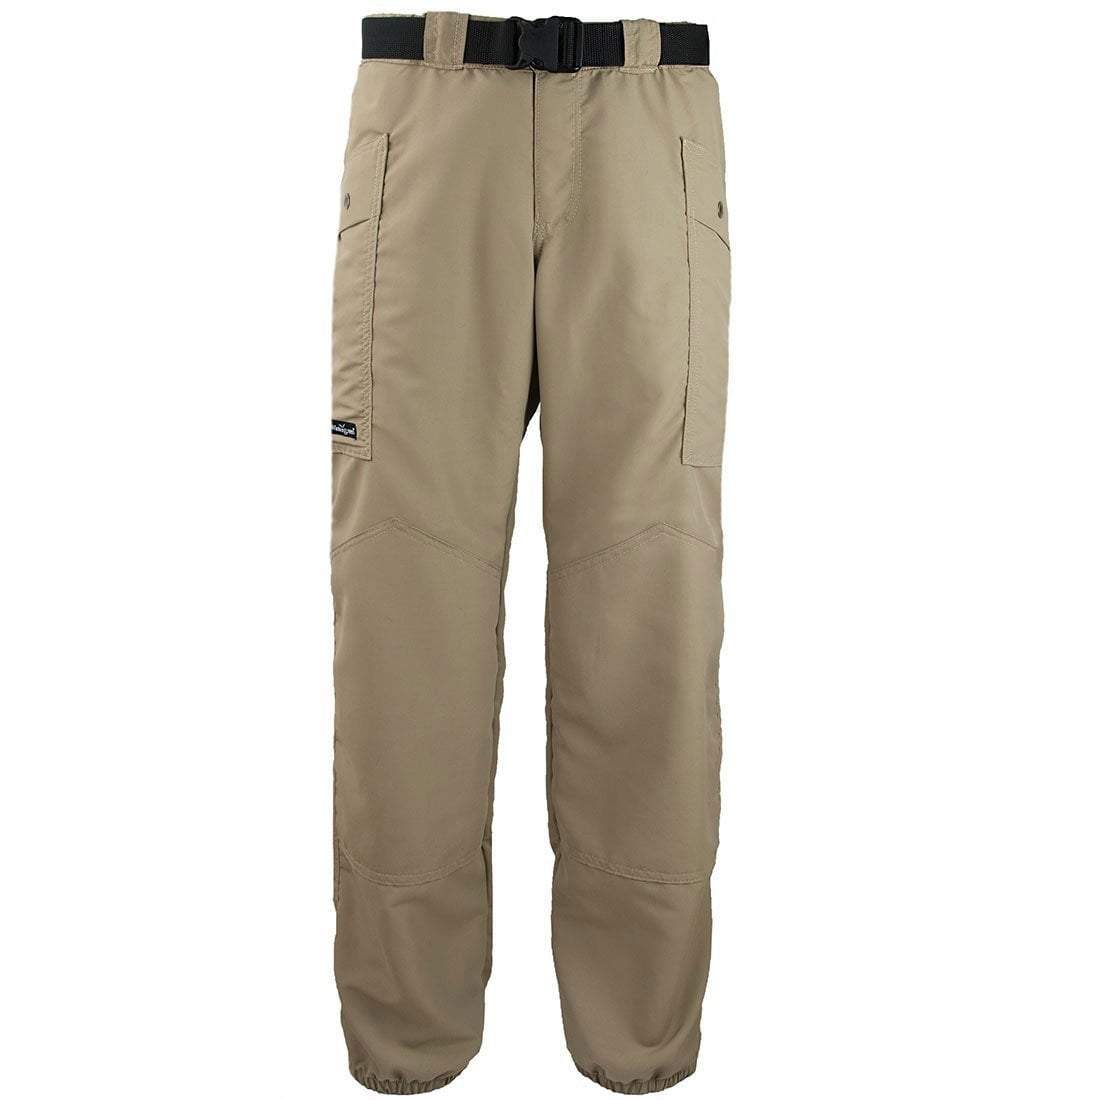 Boundary Waters Shell Pants (Men's)